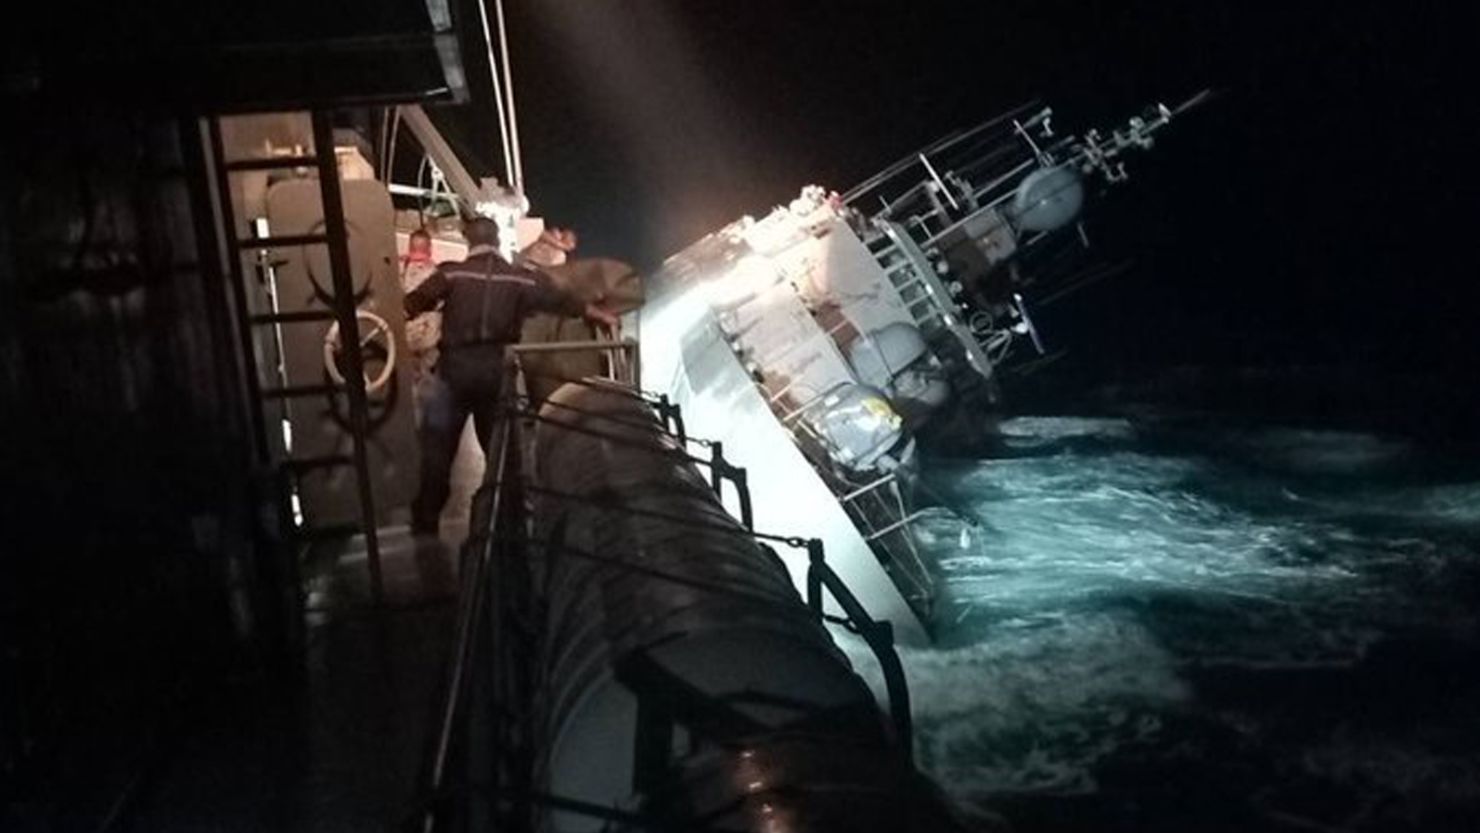 The Royal Thai Navy ship Sukhothai lists heavily before sinking in the Gulf of Thailand early Monday morning.